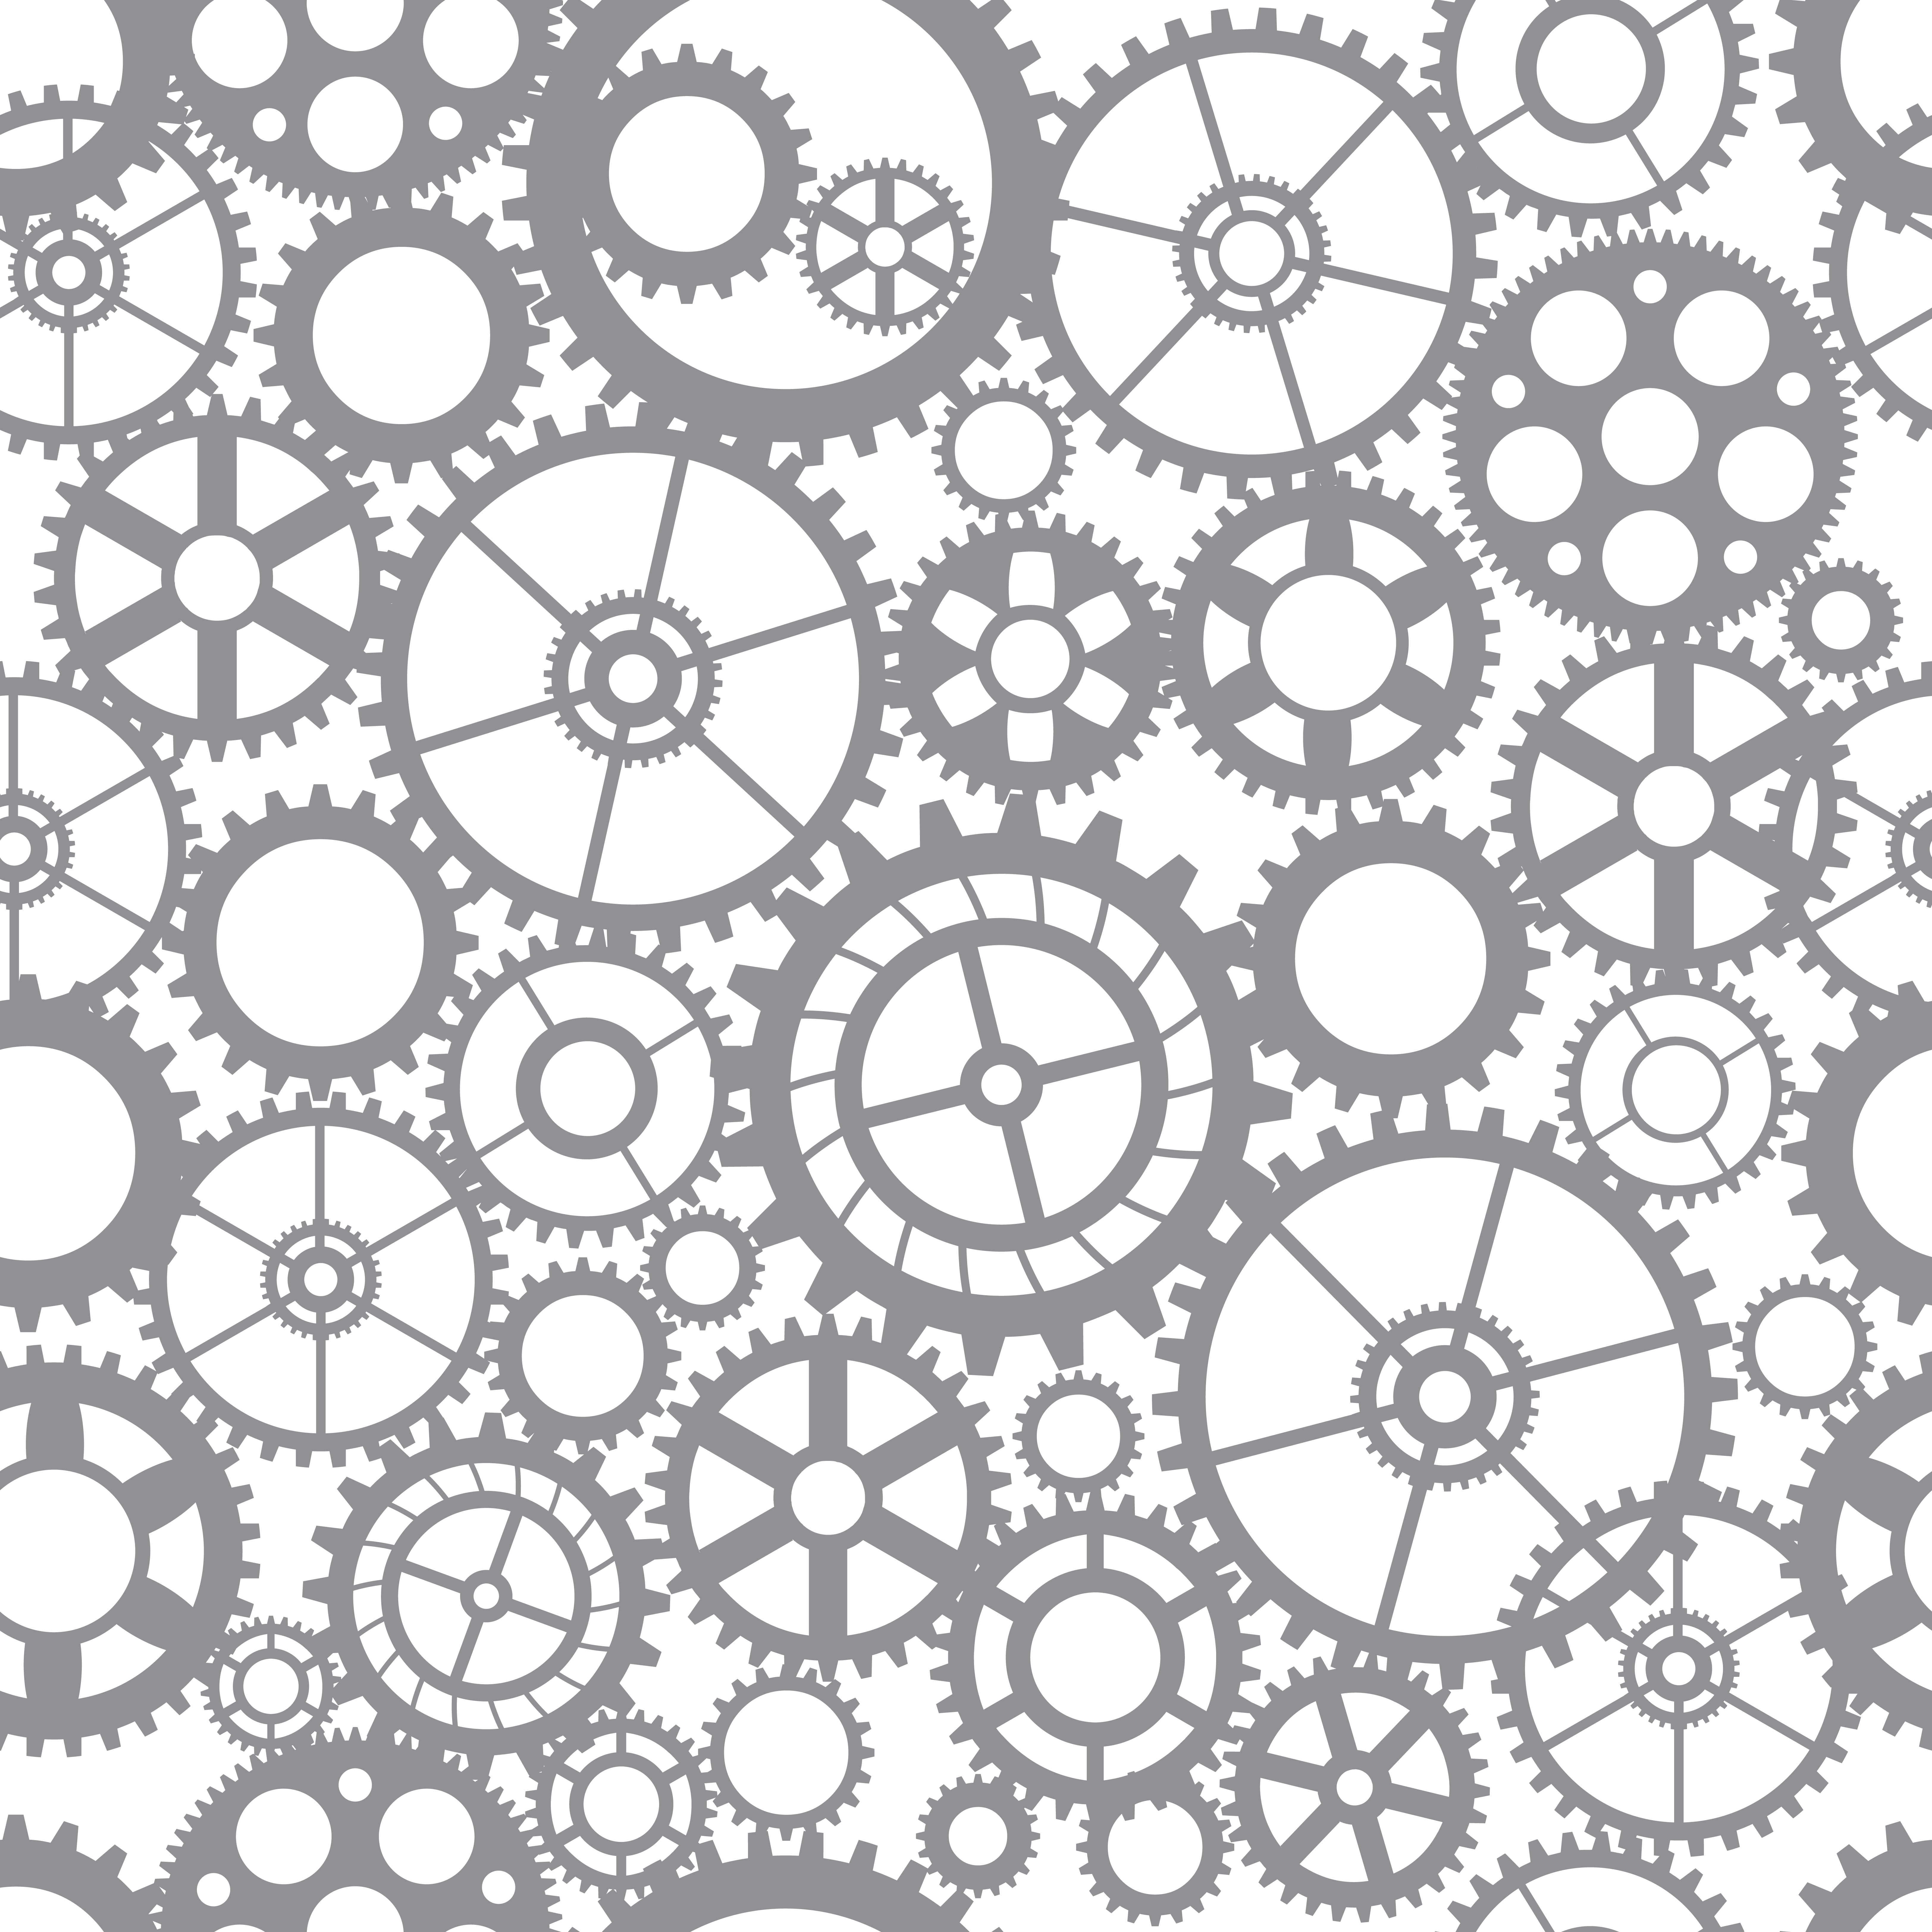 Download Pattern silhouette cut gears - Download Free Vectors, Clipart Graphics & Vector Art